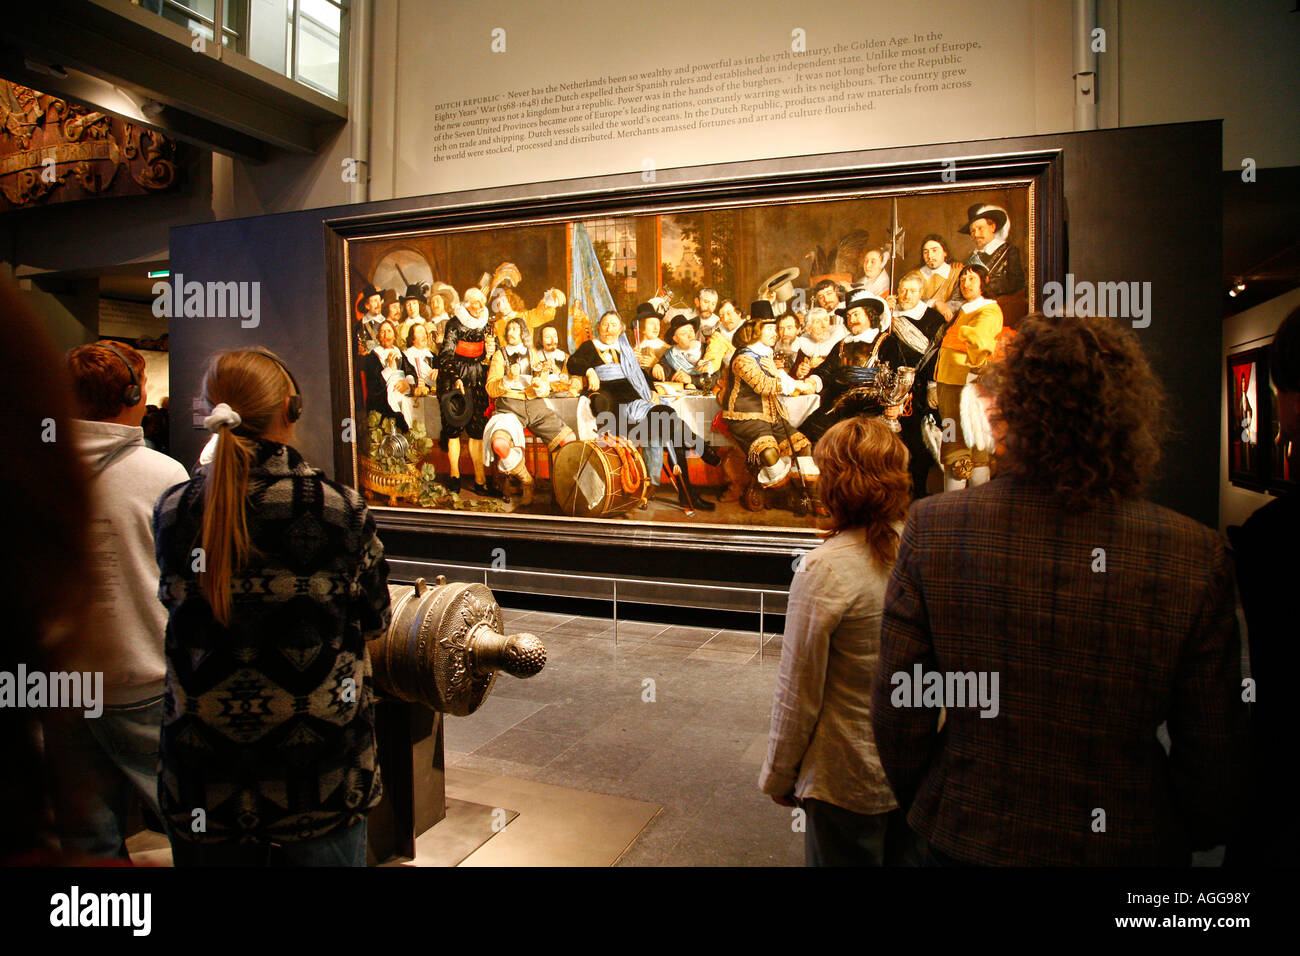 People at the Rijksmuseum Amsterdam Holland Stock Photo